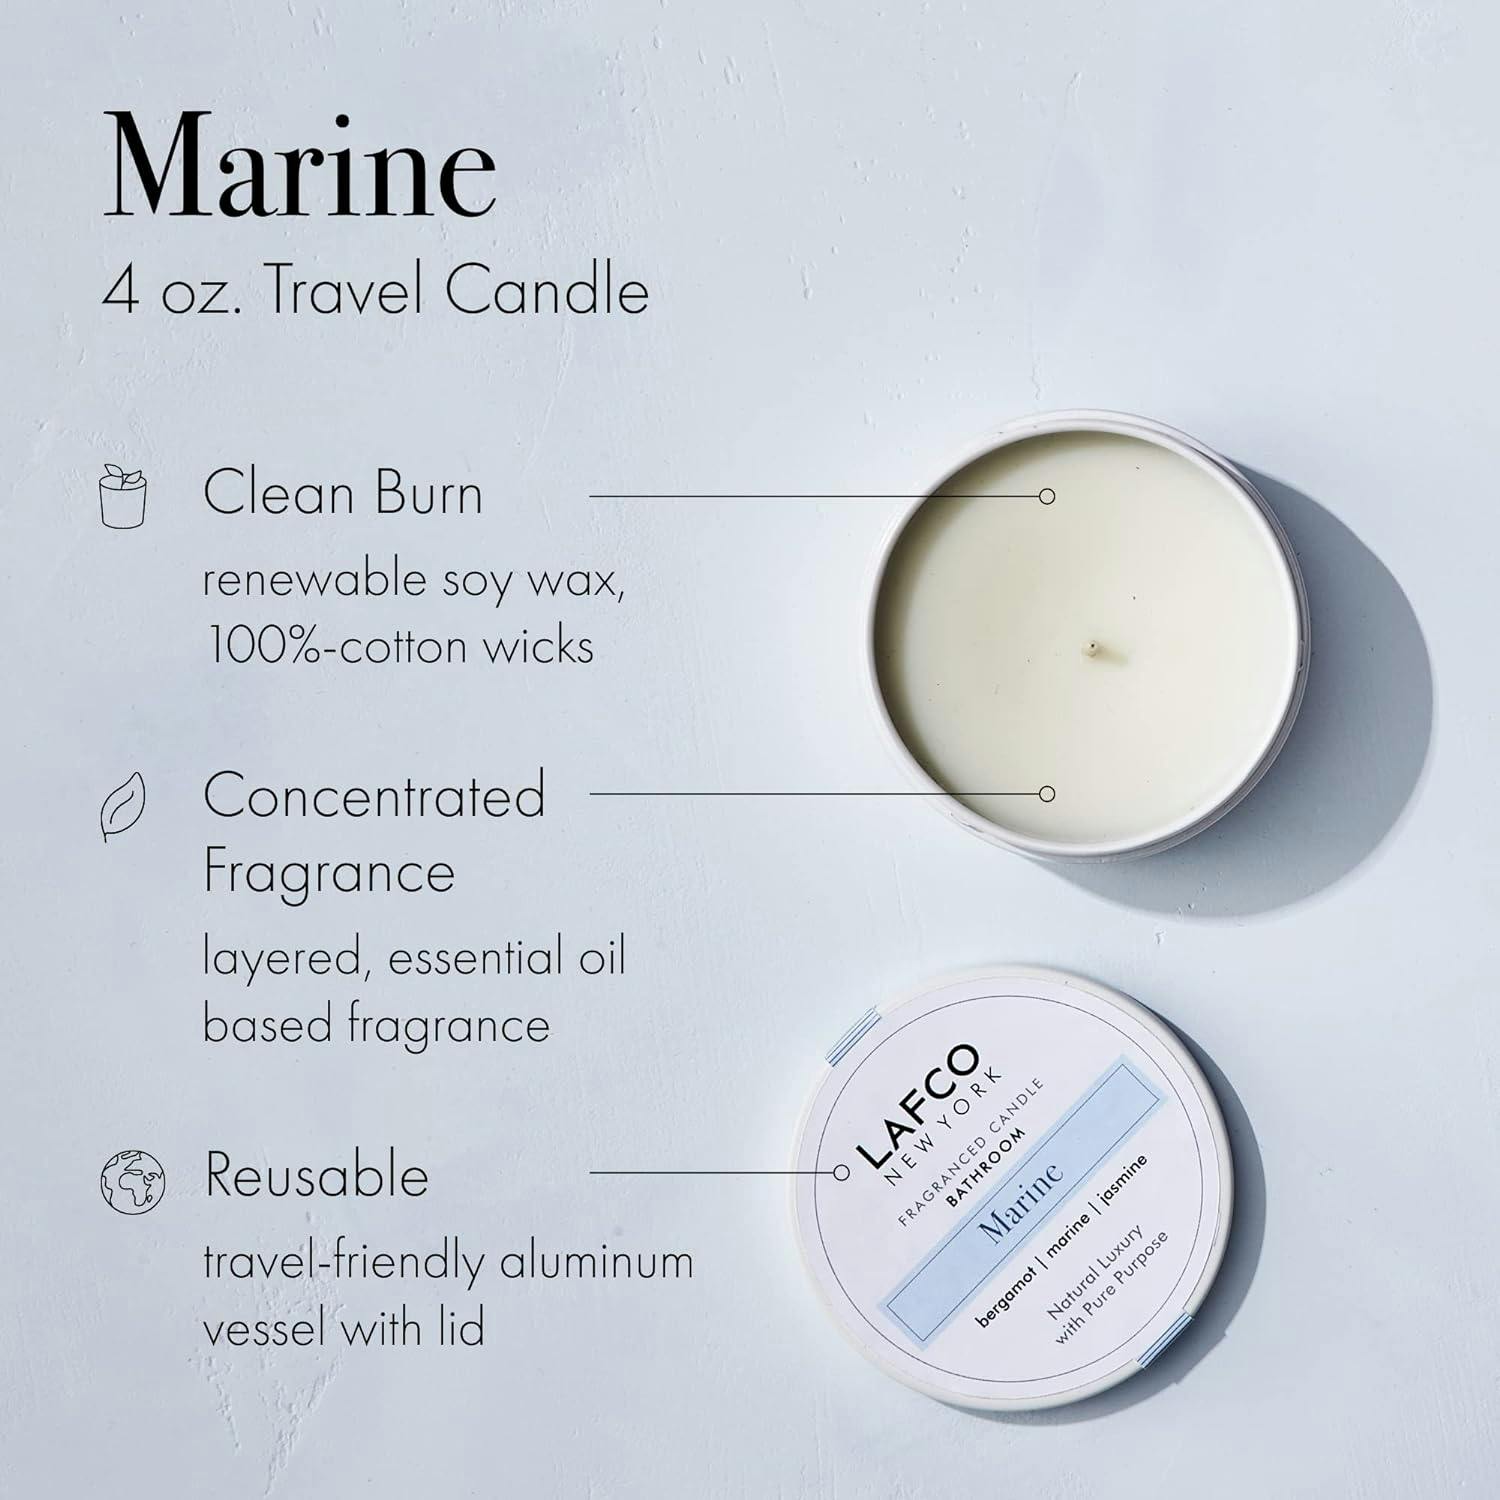 Marine Essence Travel Candle 4oz - White Soy Wax with Fresh Scent